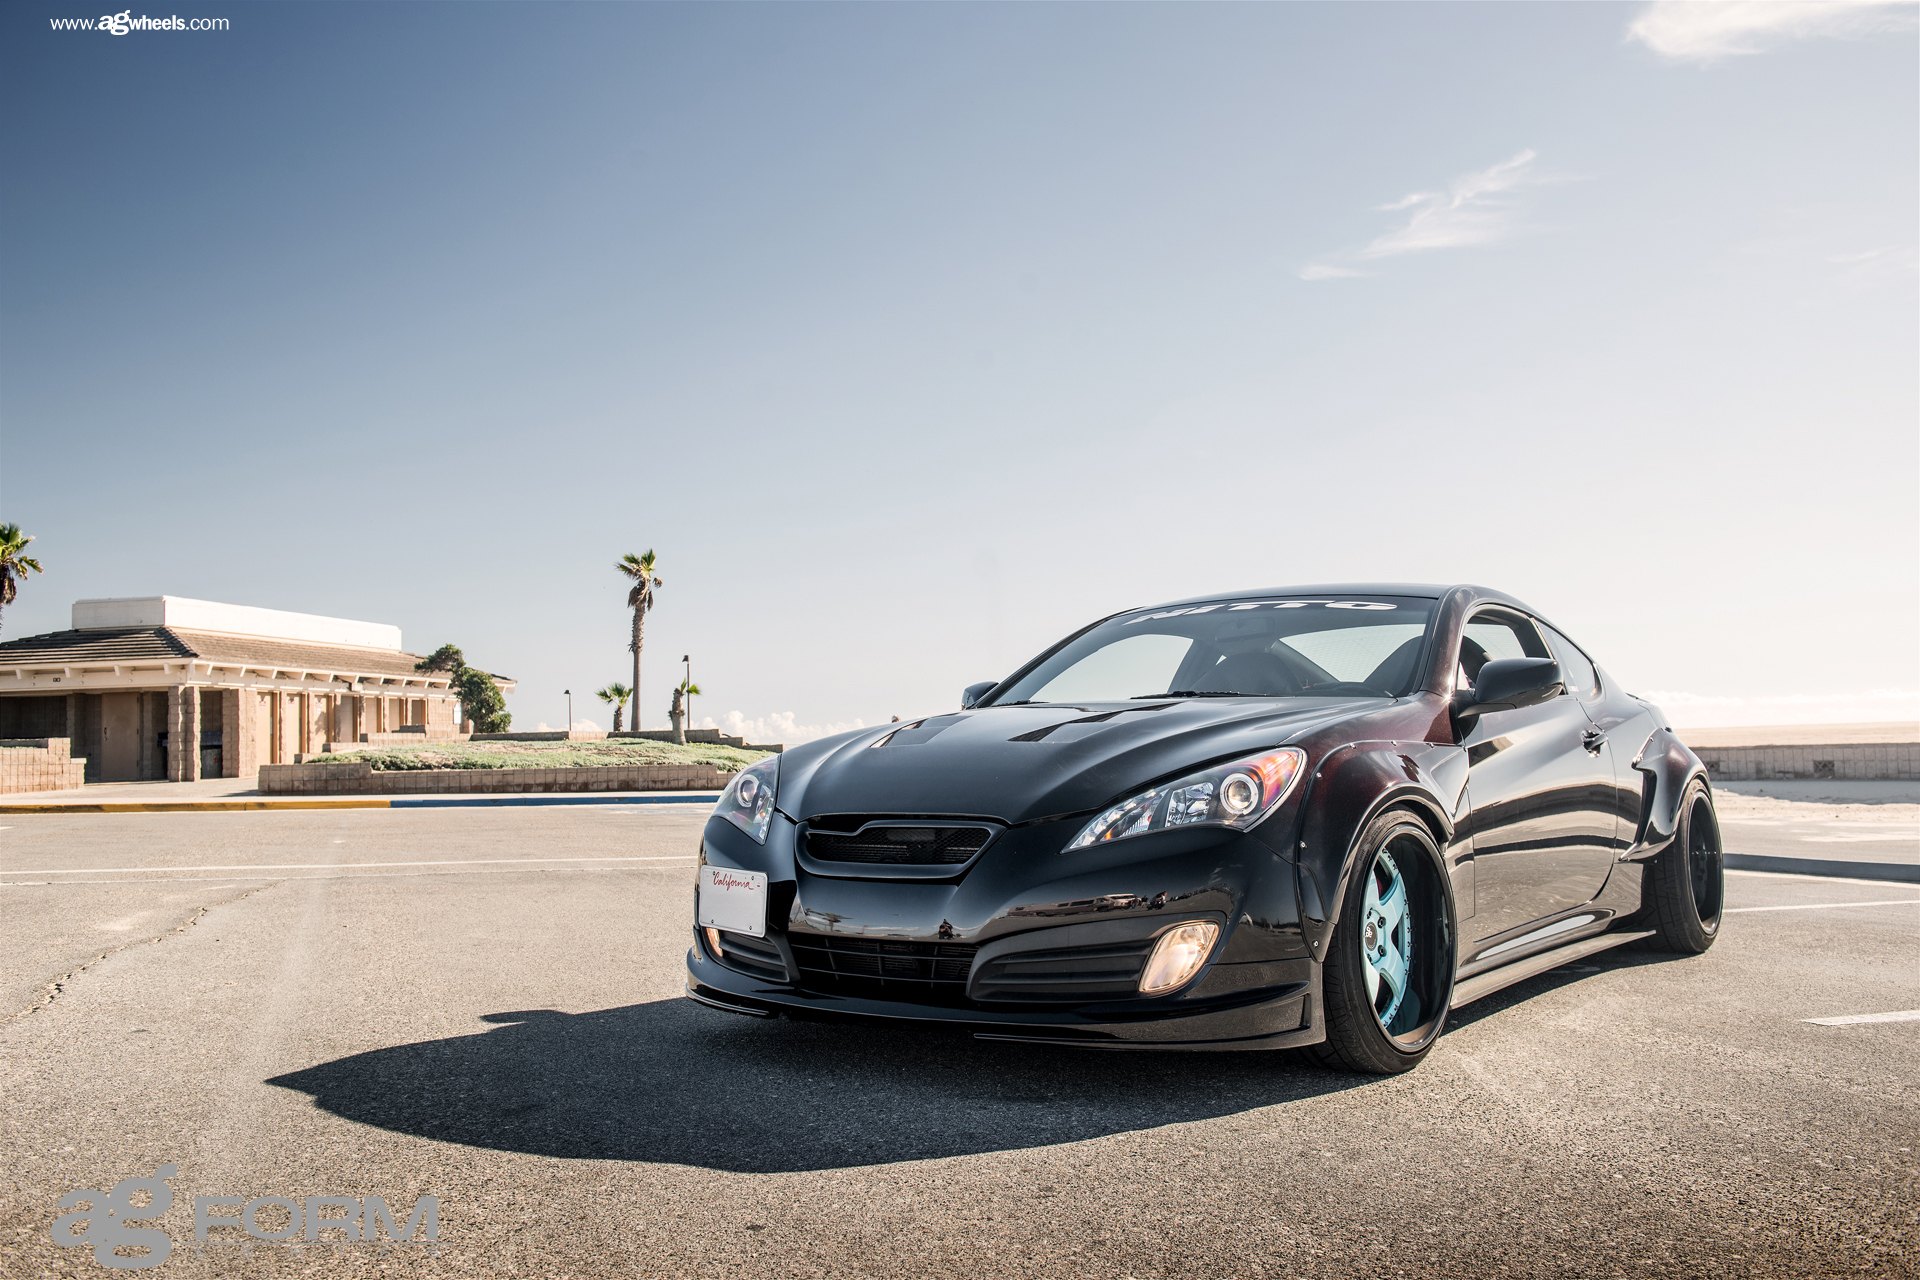 Hyundai Genesis Coupe With Wide Overfenders - Photo by Avant Garde